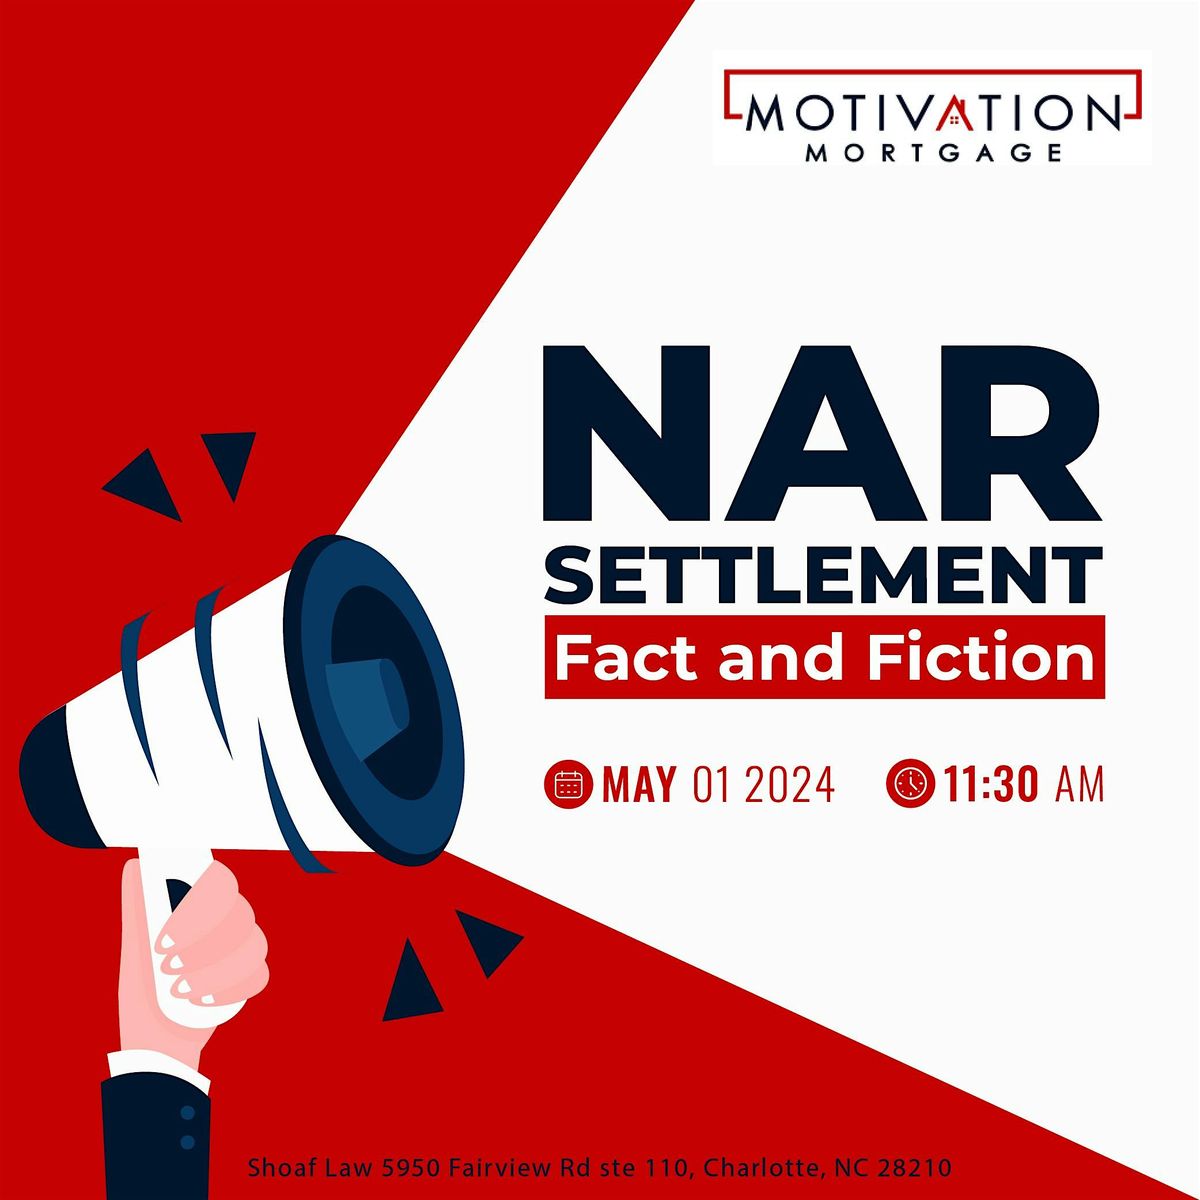 NAR Settlement: Fact and Fiction